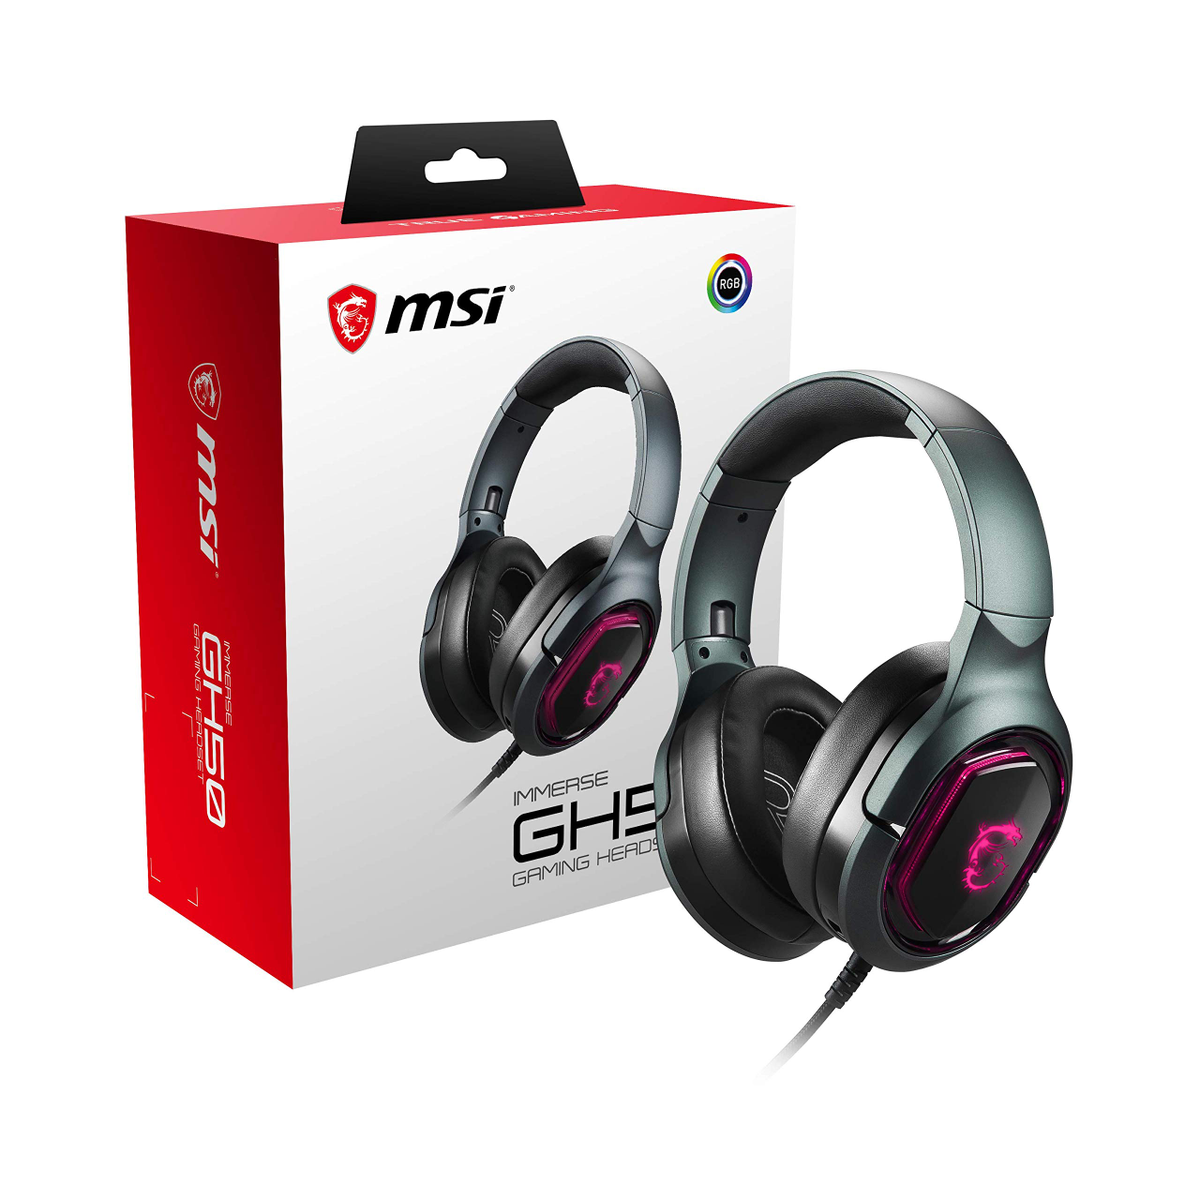 HEADSET, GH50 GAMING Schwarz Over-ear IMMERSE S37-0400020-SV1 MSI Headset Gaming